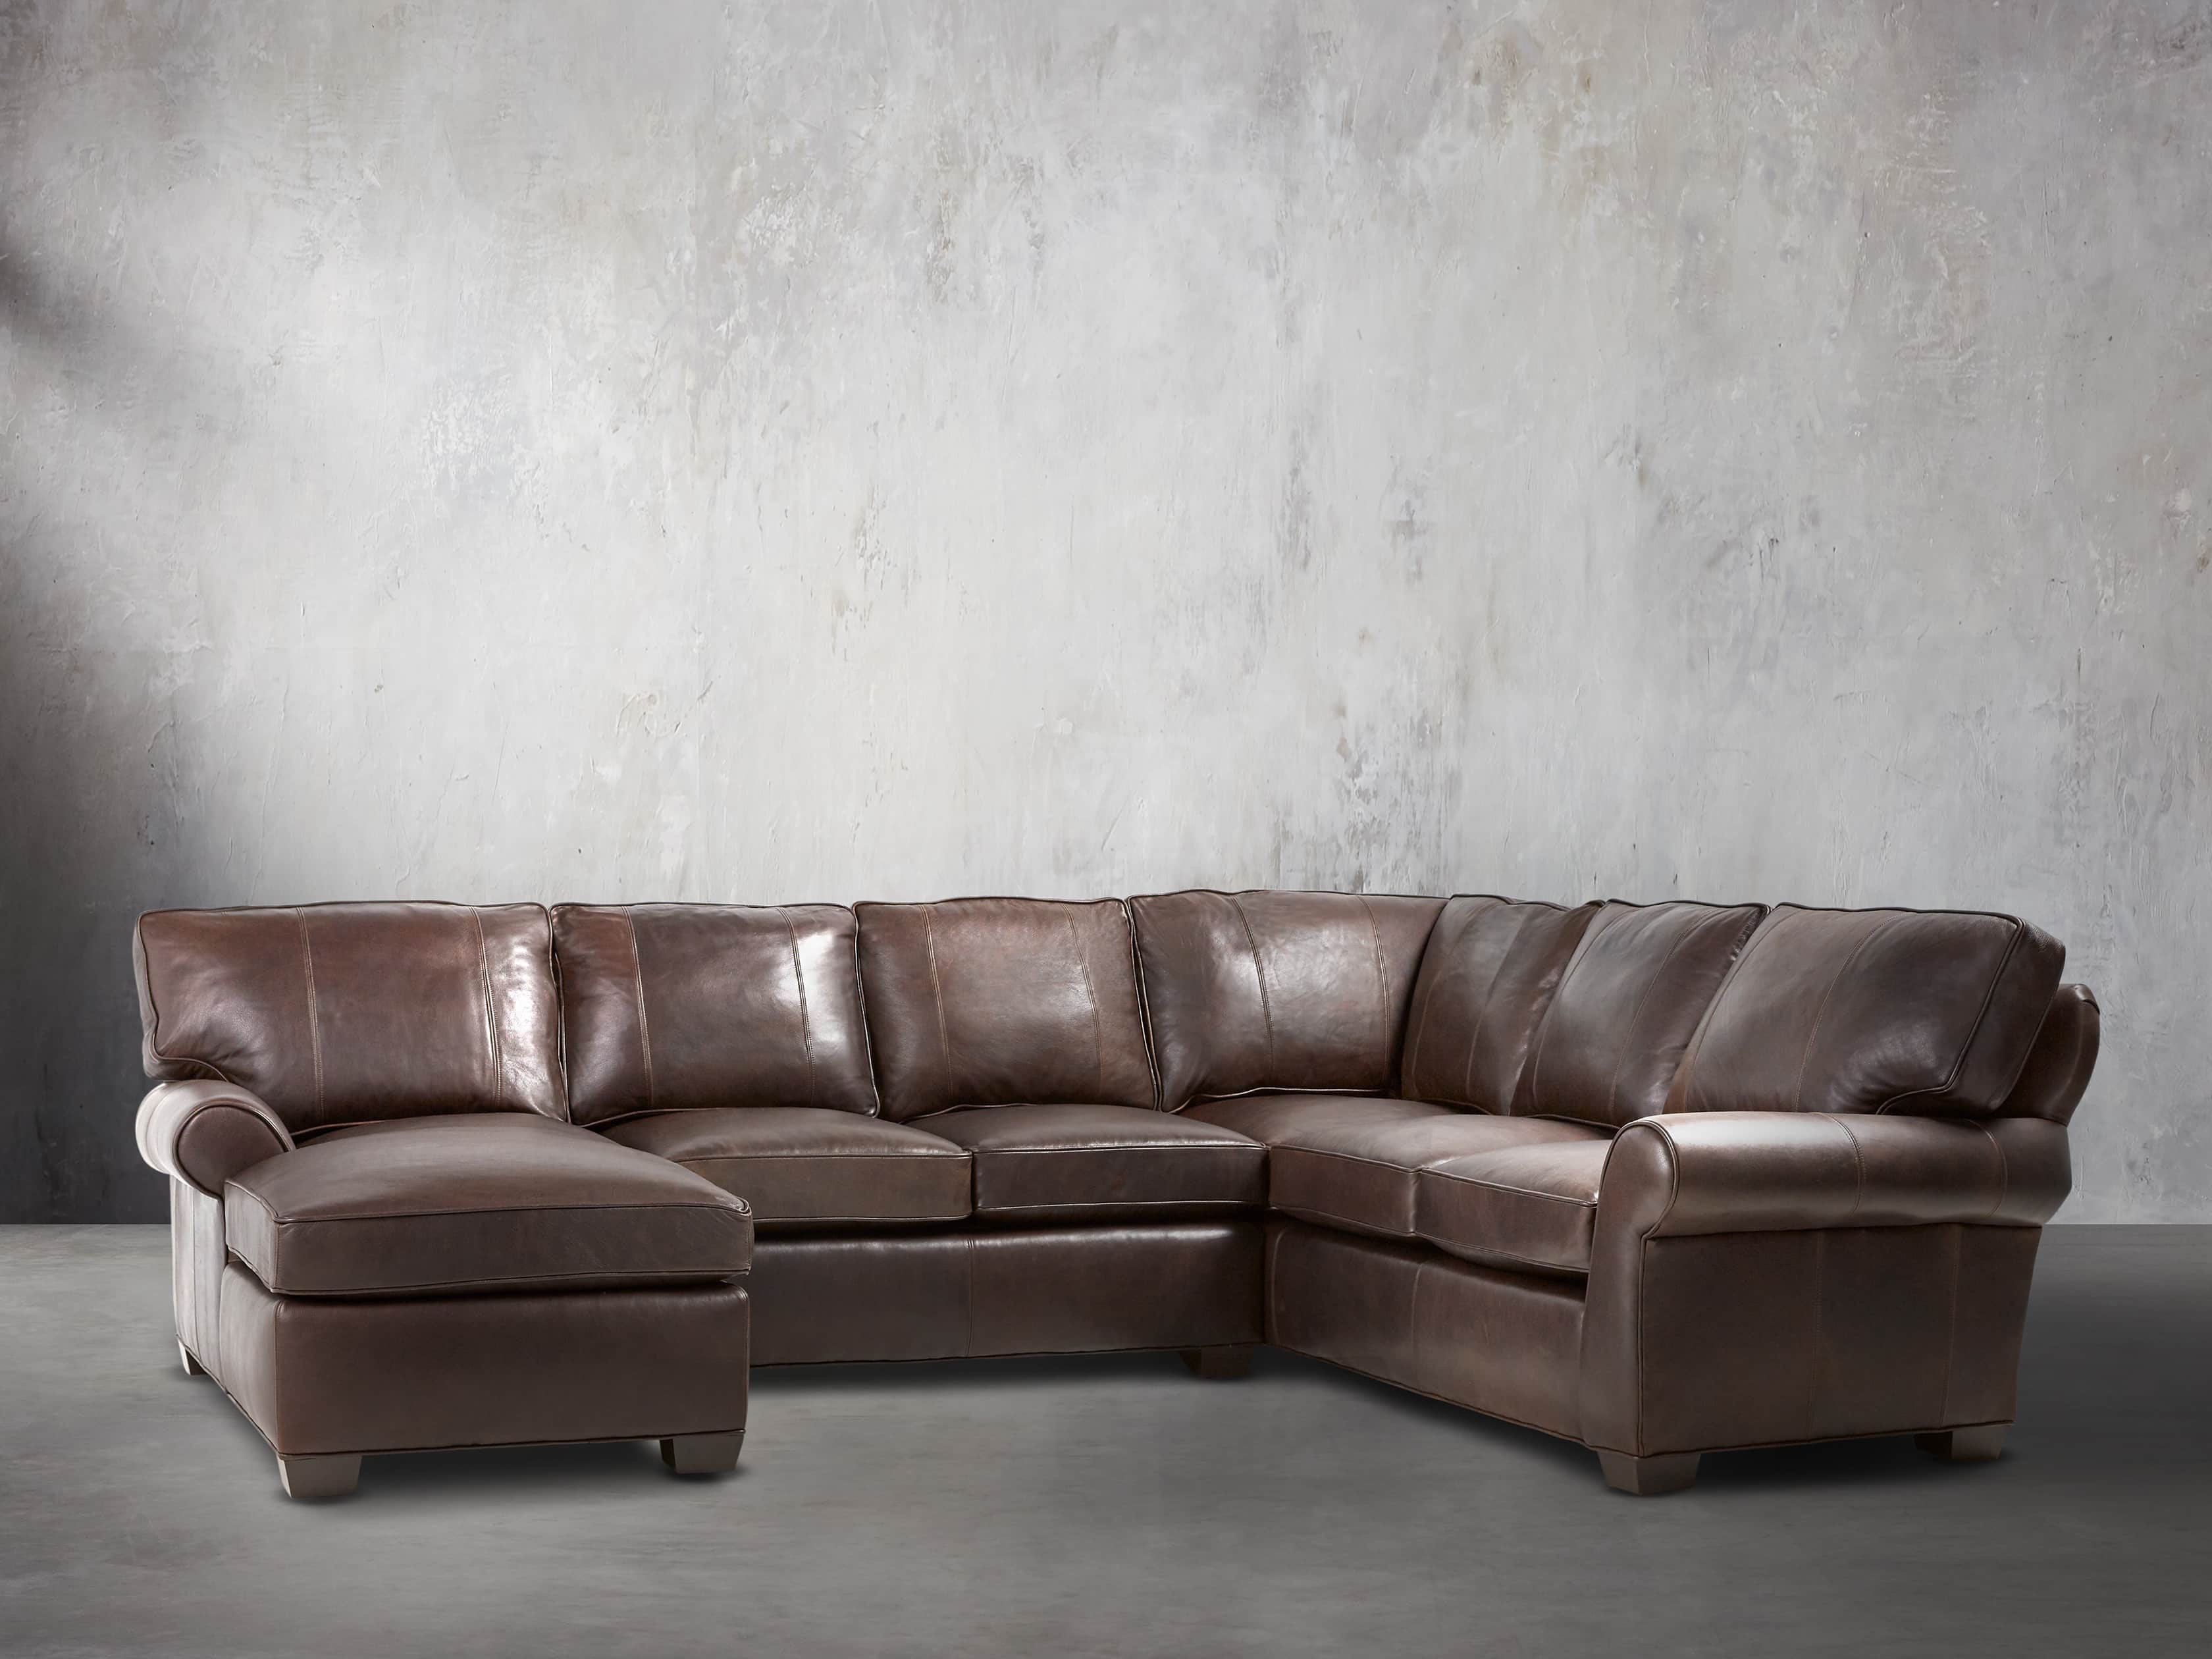 Bwood Leather Three Piece Sectional, Leather Sofa Sectional Piece